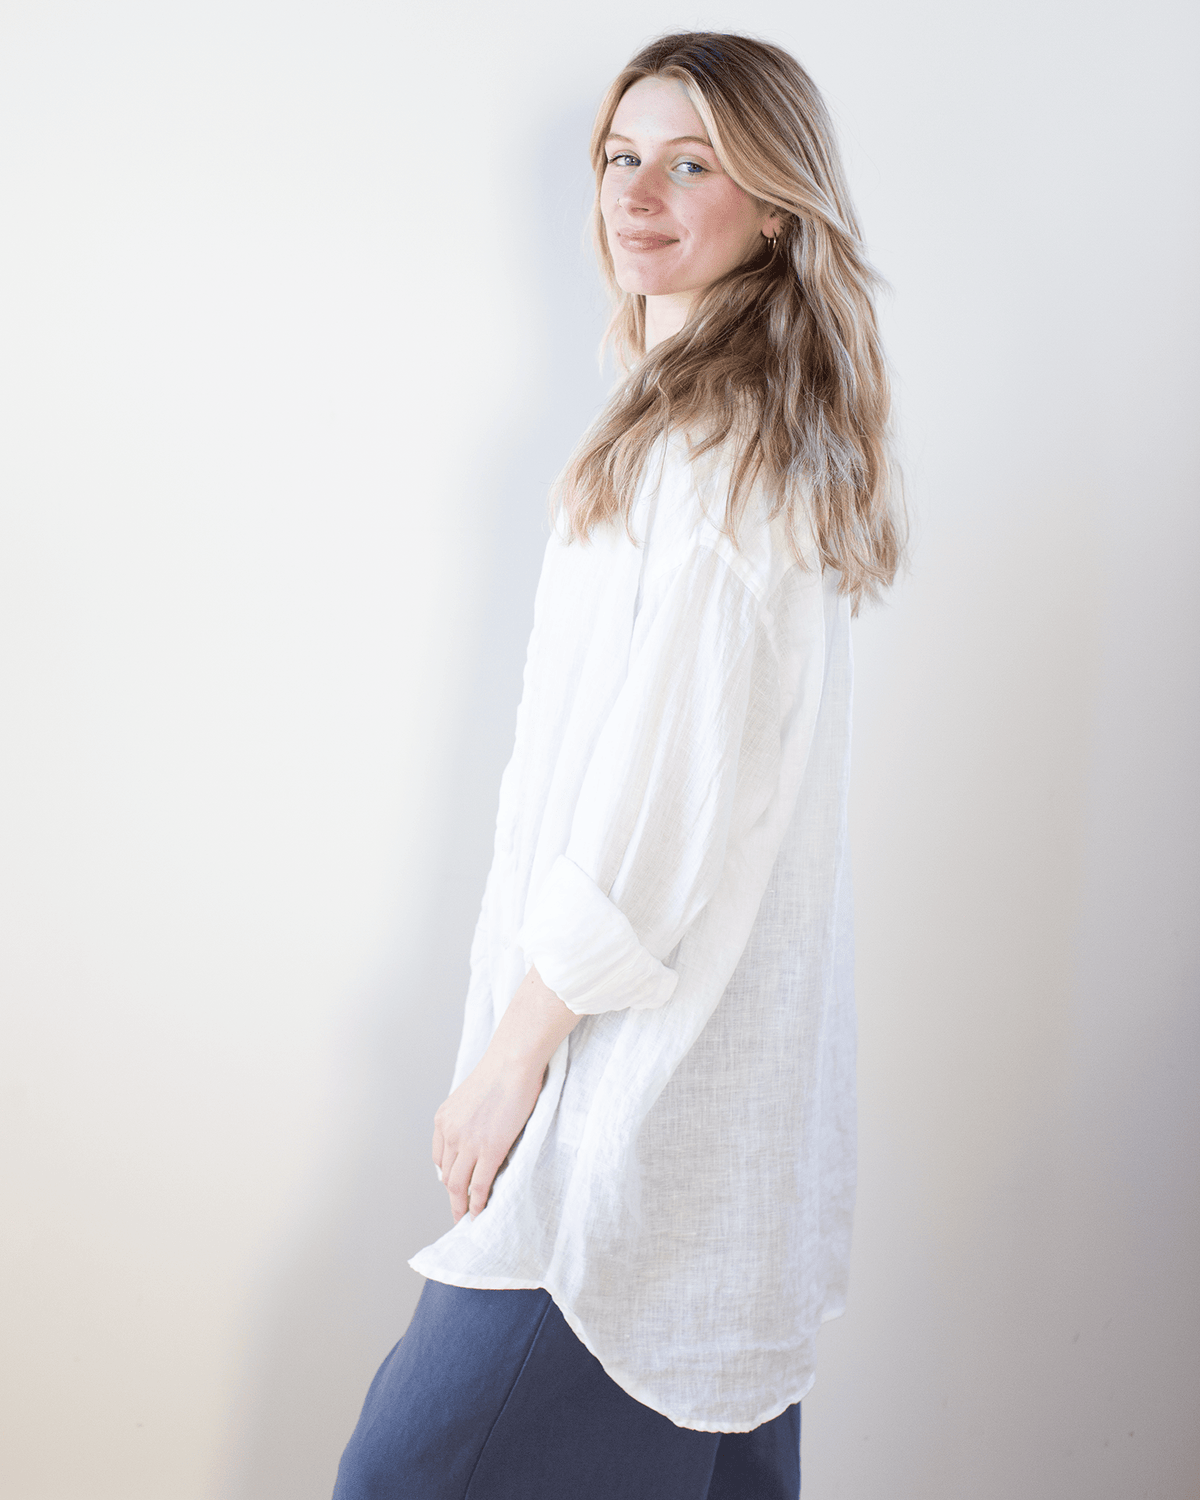 CP Shades Clothing Jane Oversized Button Down w/o Pkts in White Linen